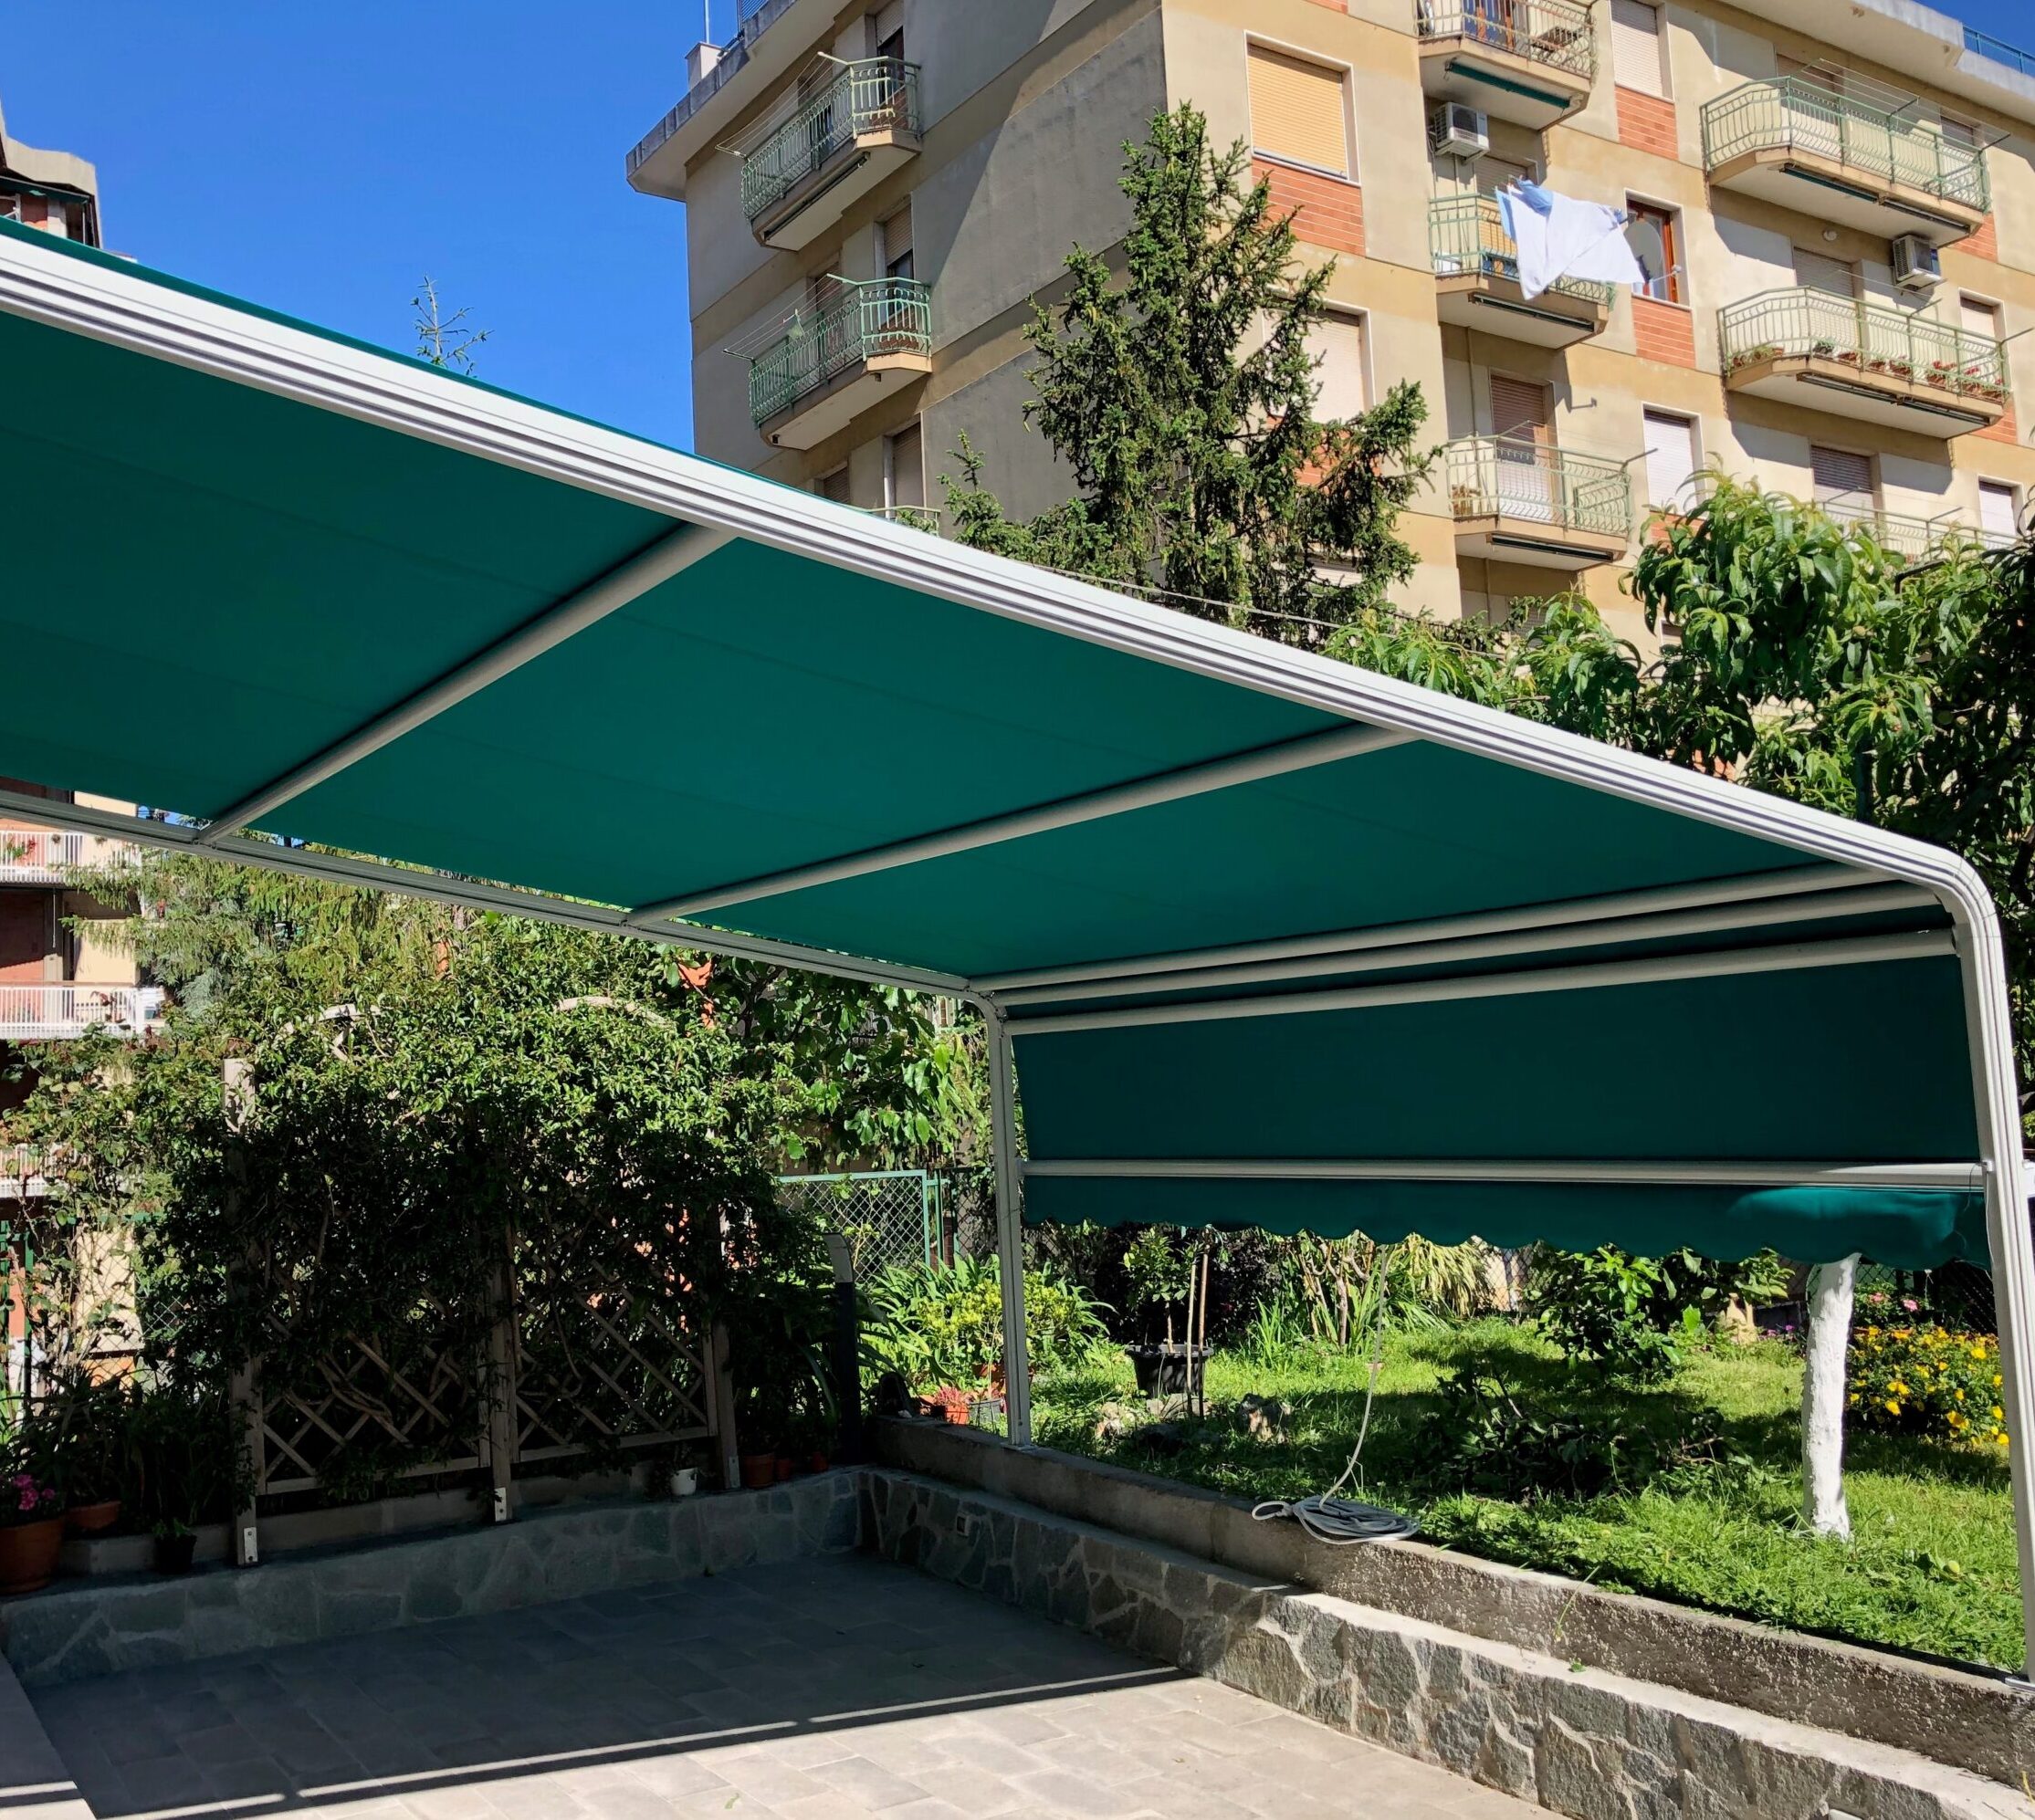 SIDE RAIL AWNINGS S-93 MECTEND